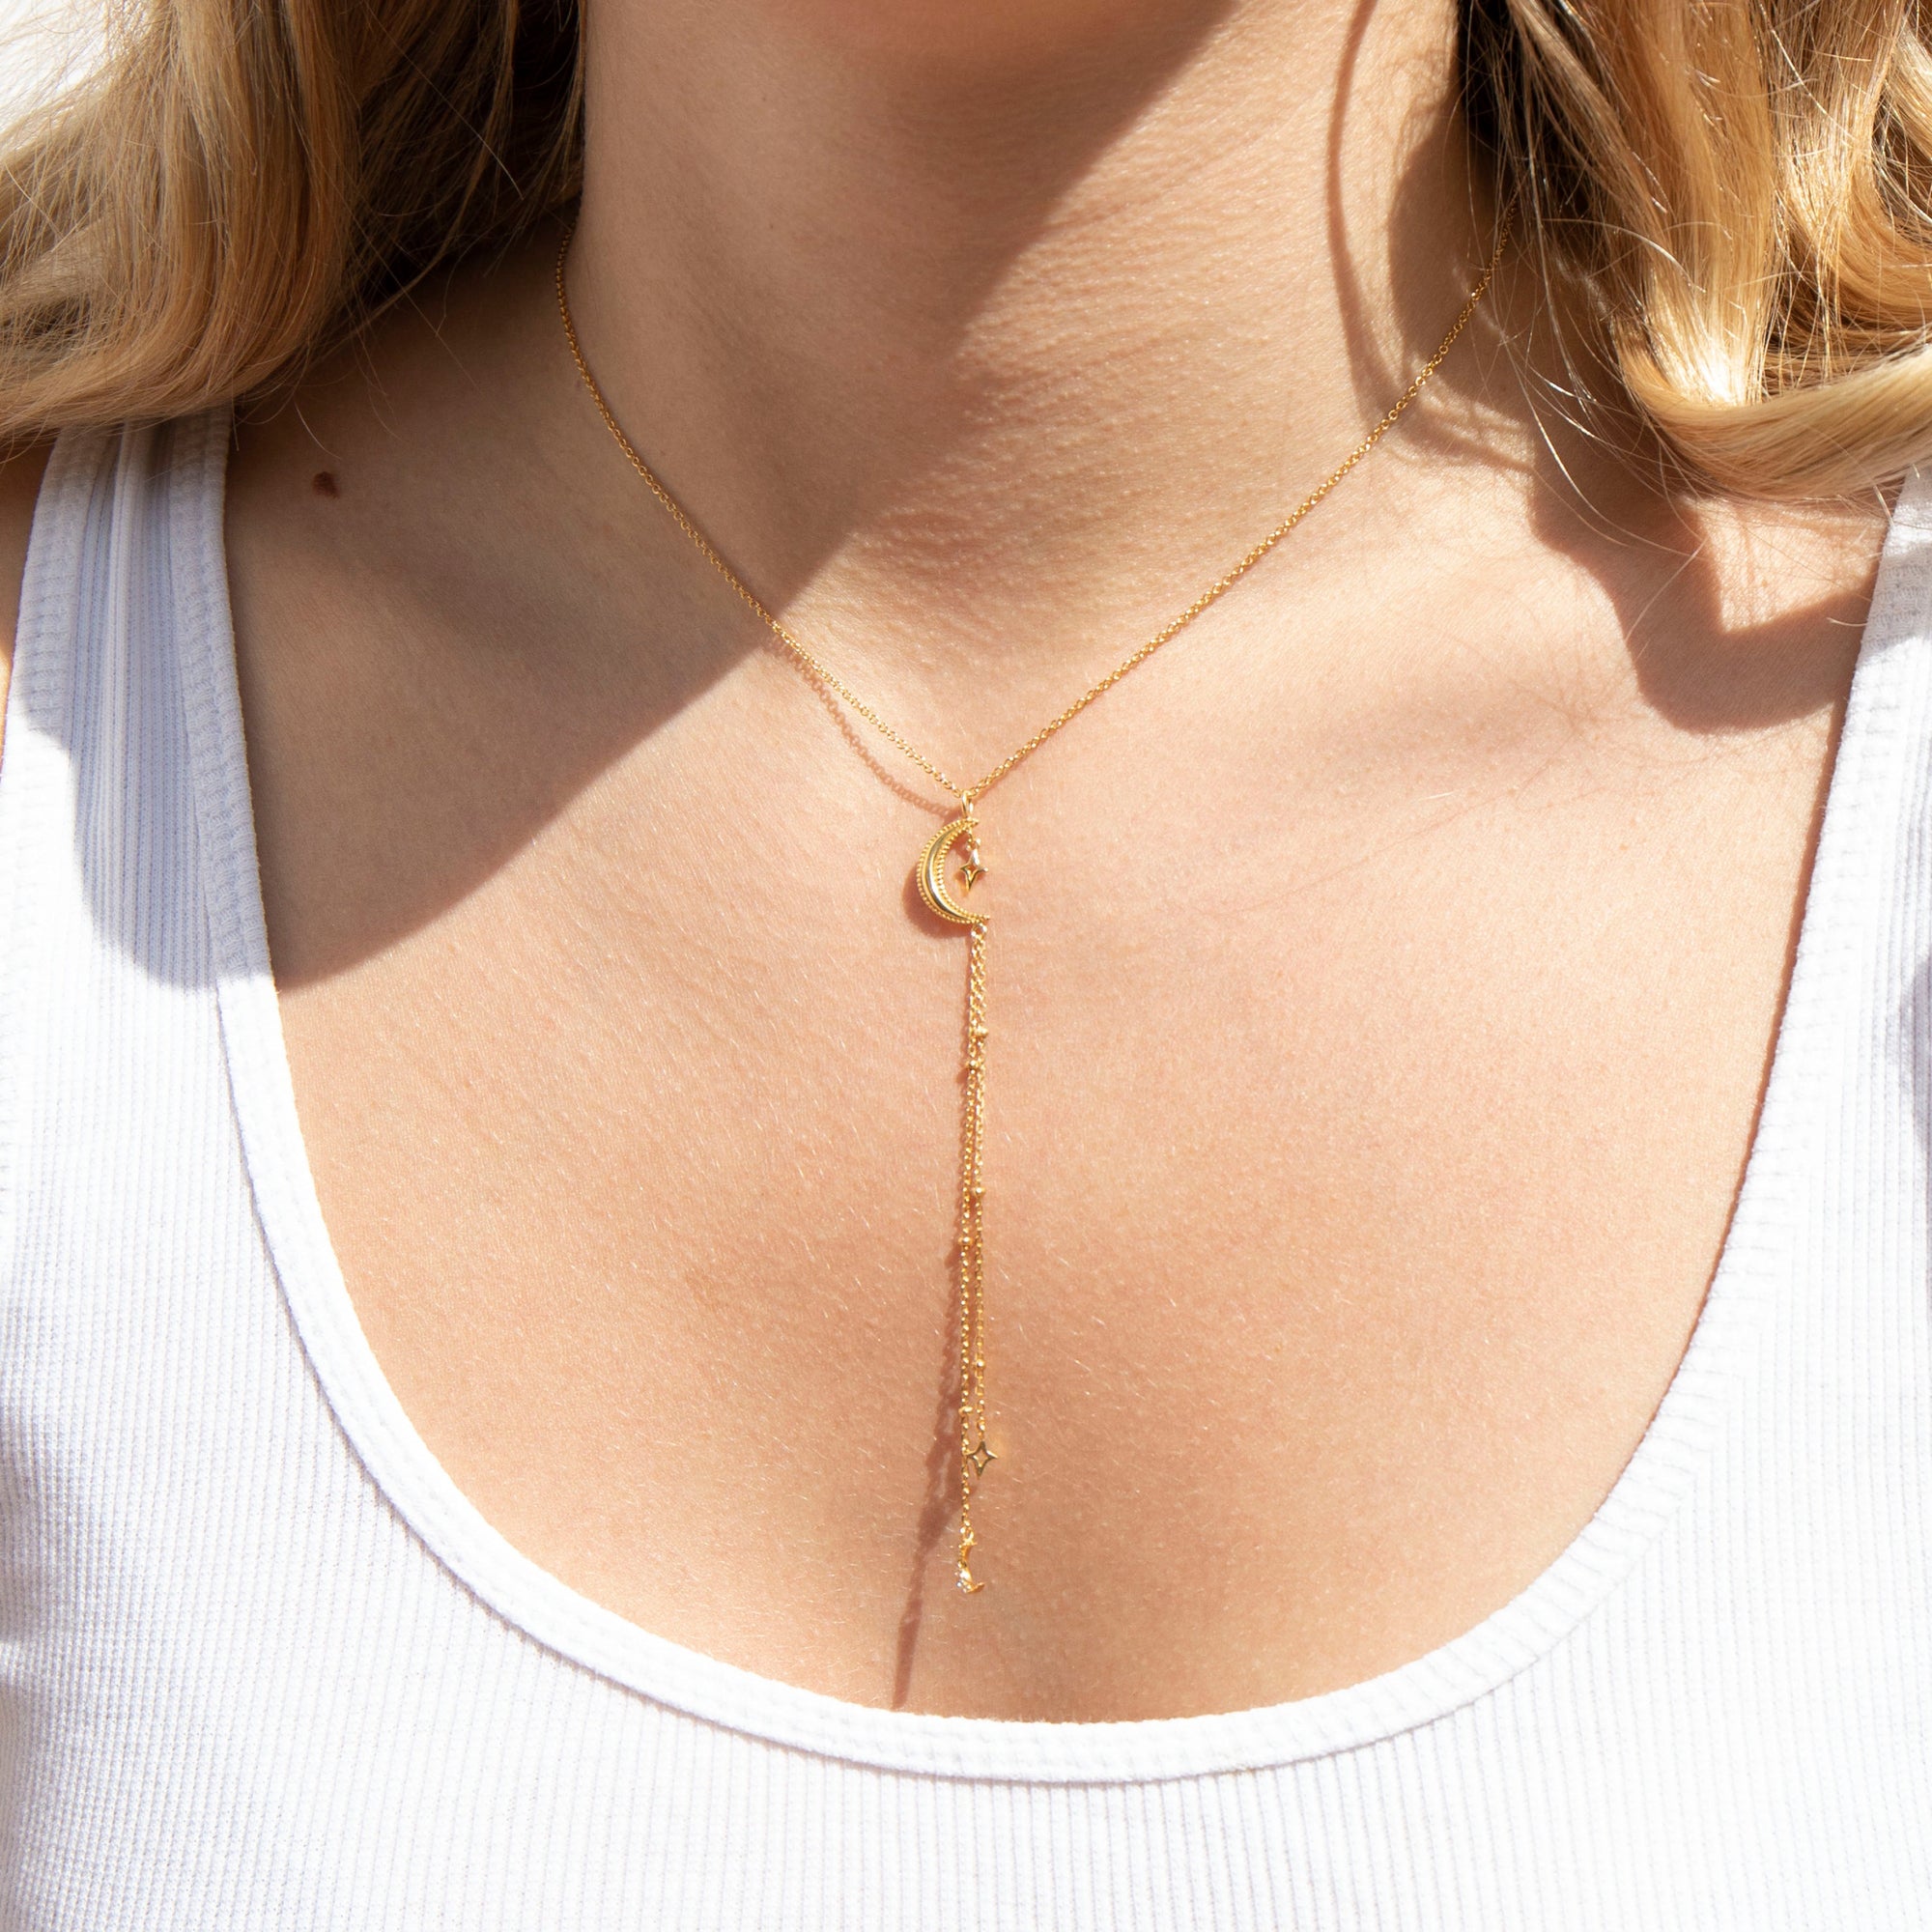 Stars and moon lariat necklace - seol-gold